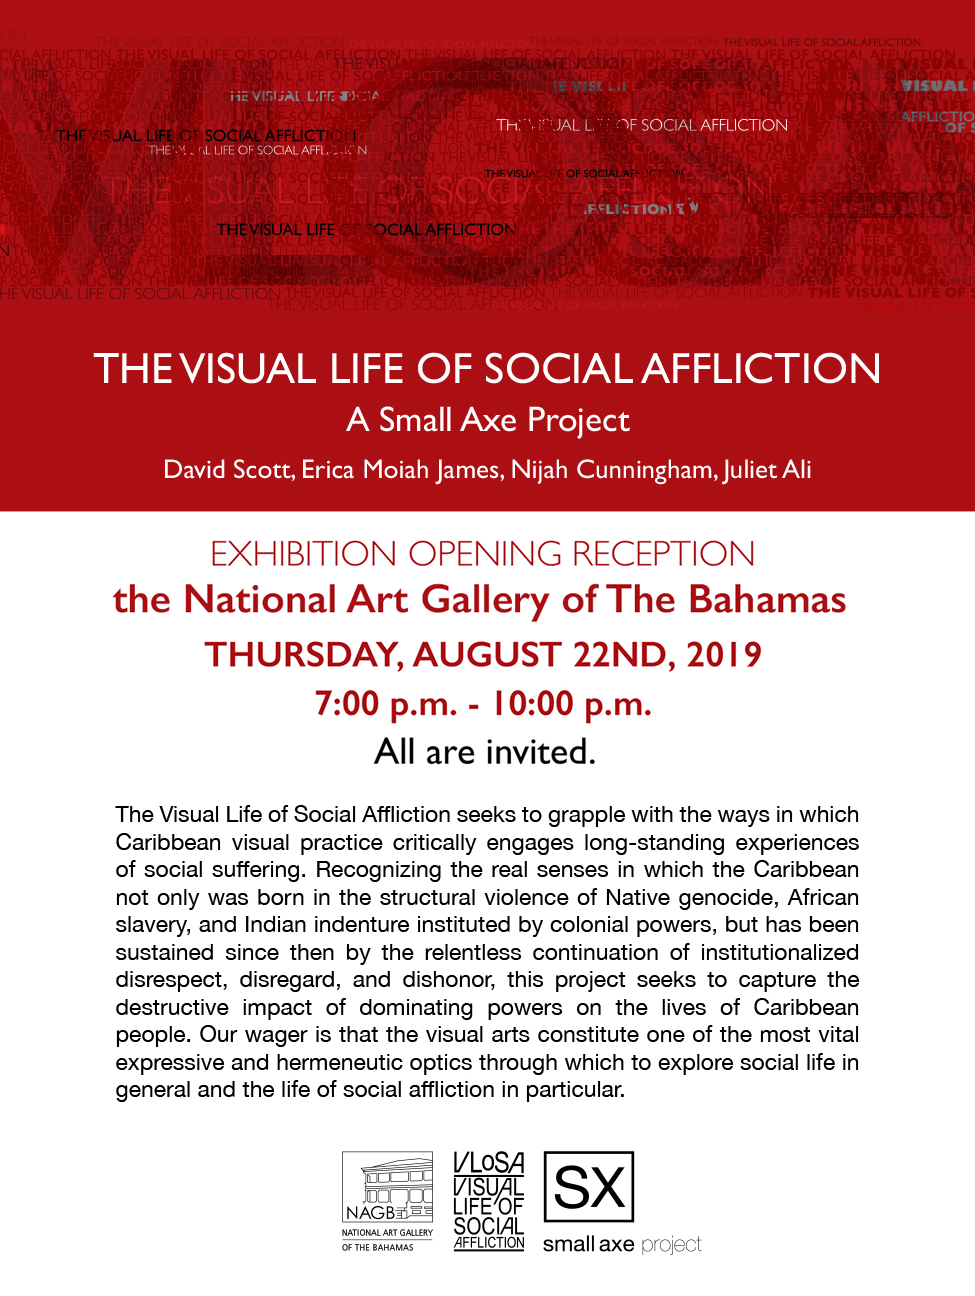 The Visual Life of Social Affliction Exhibition Opening Reception